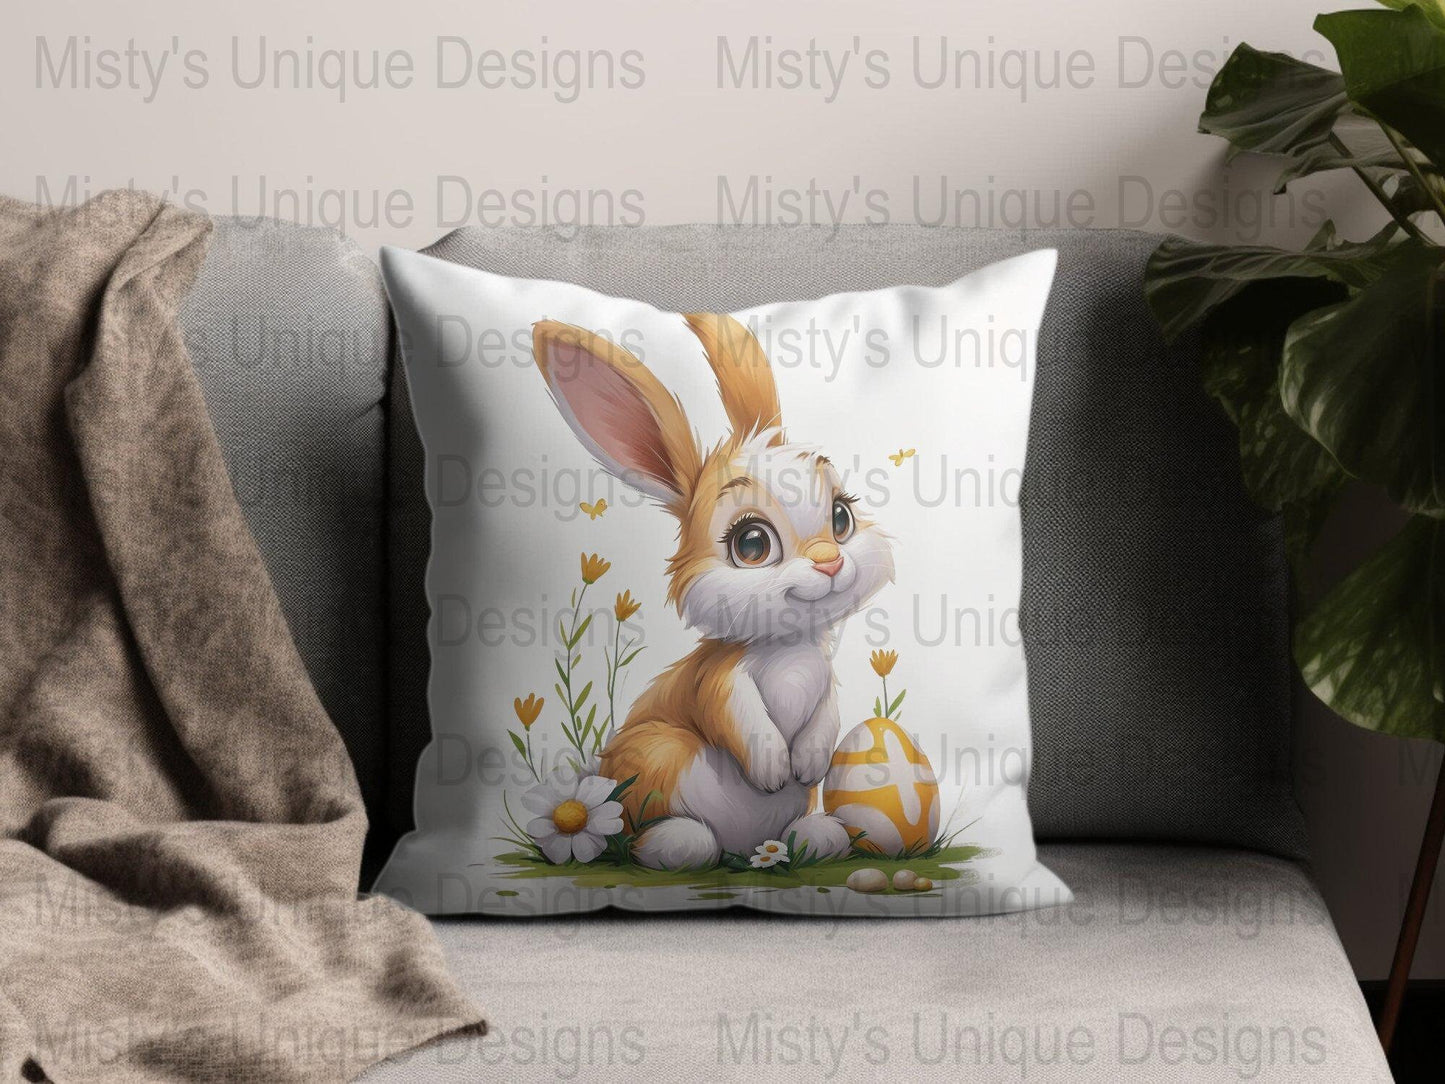 Cute Easter Bunny Clipart, Digital Download PNG, Spring Flowers & Eggs Illustration, Children&#39;s Easter Craft, Commercial Use, Print